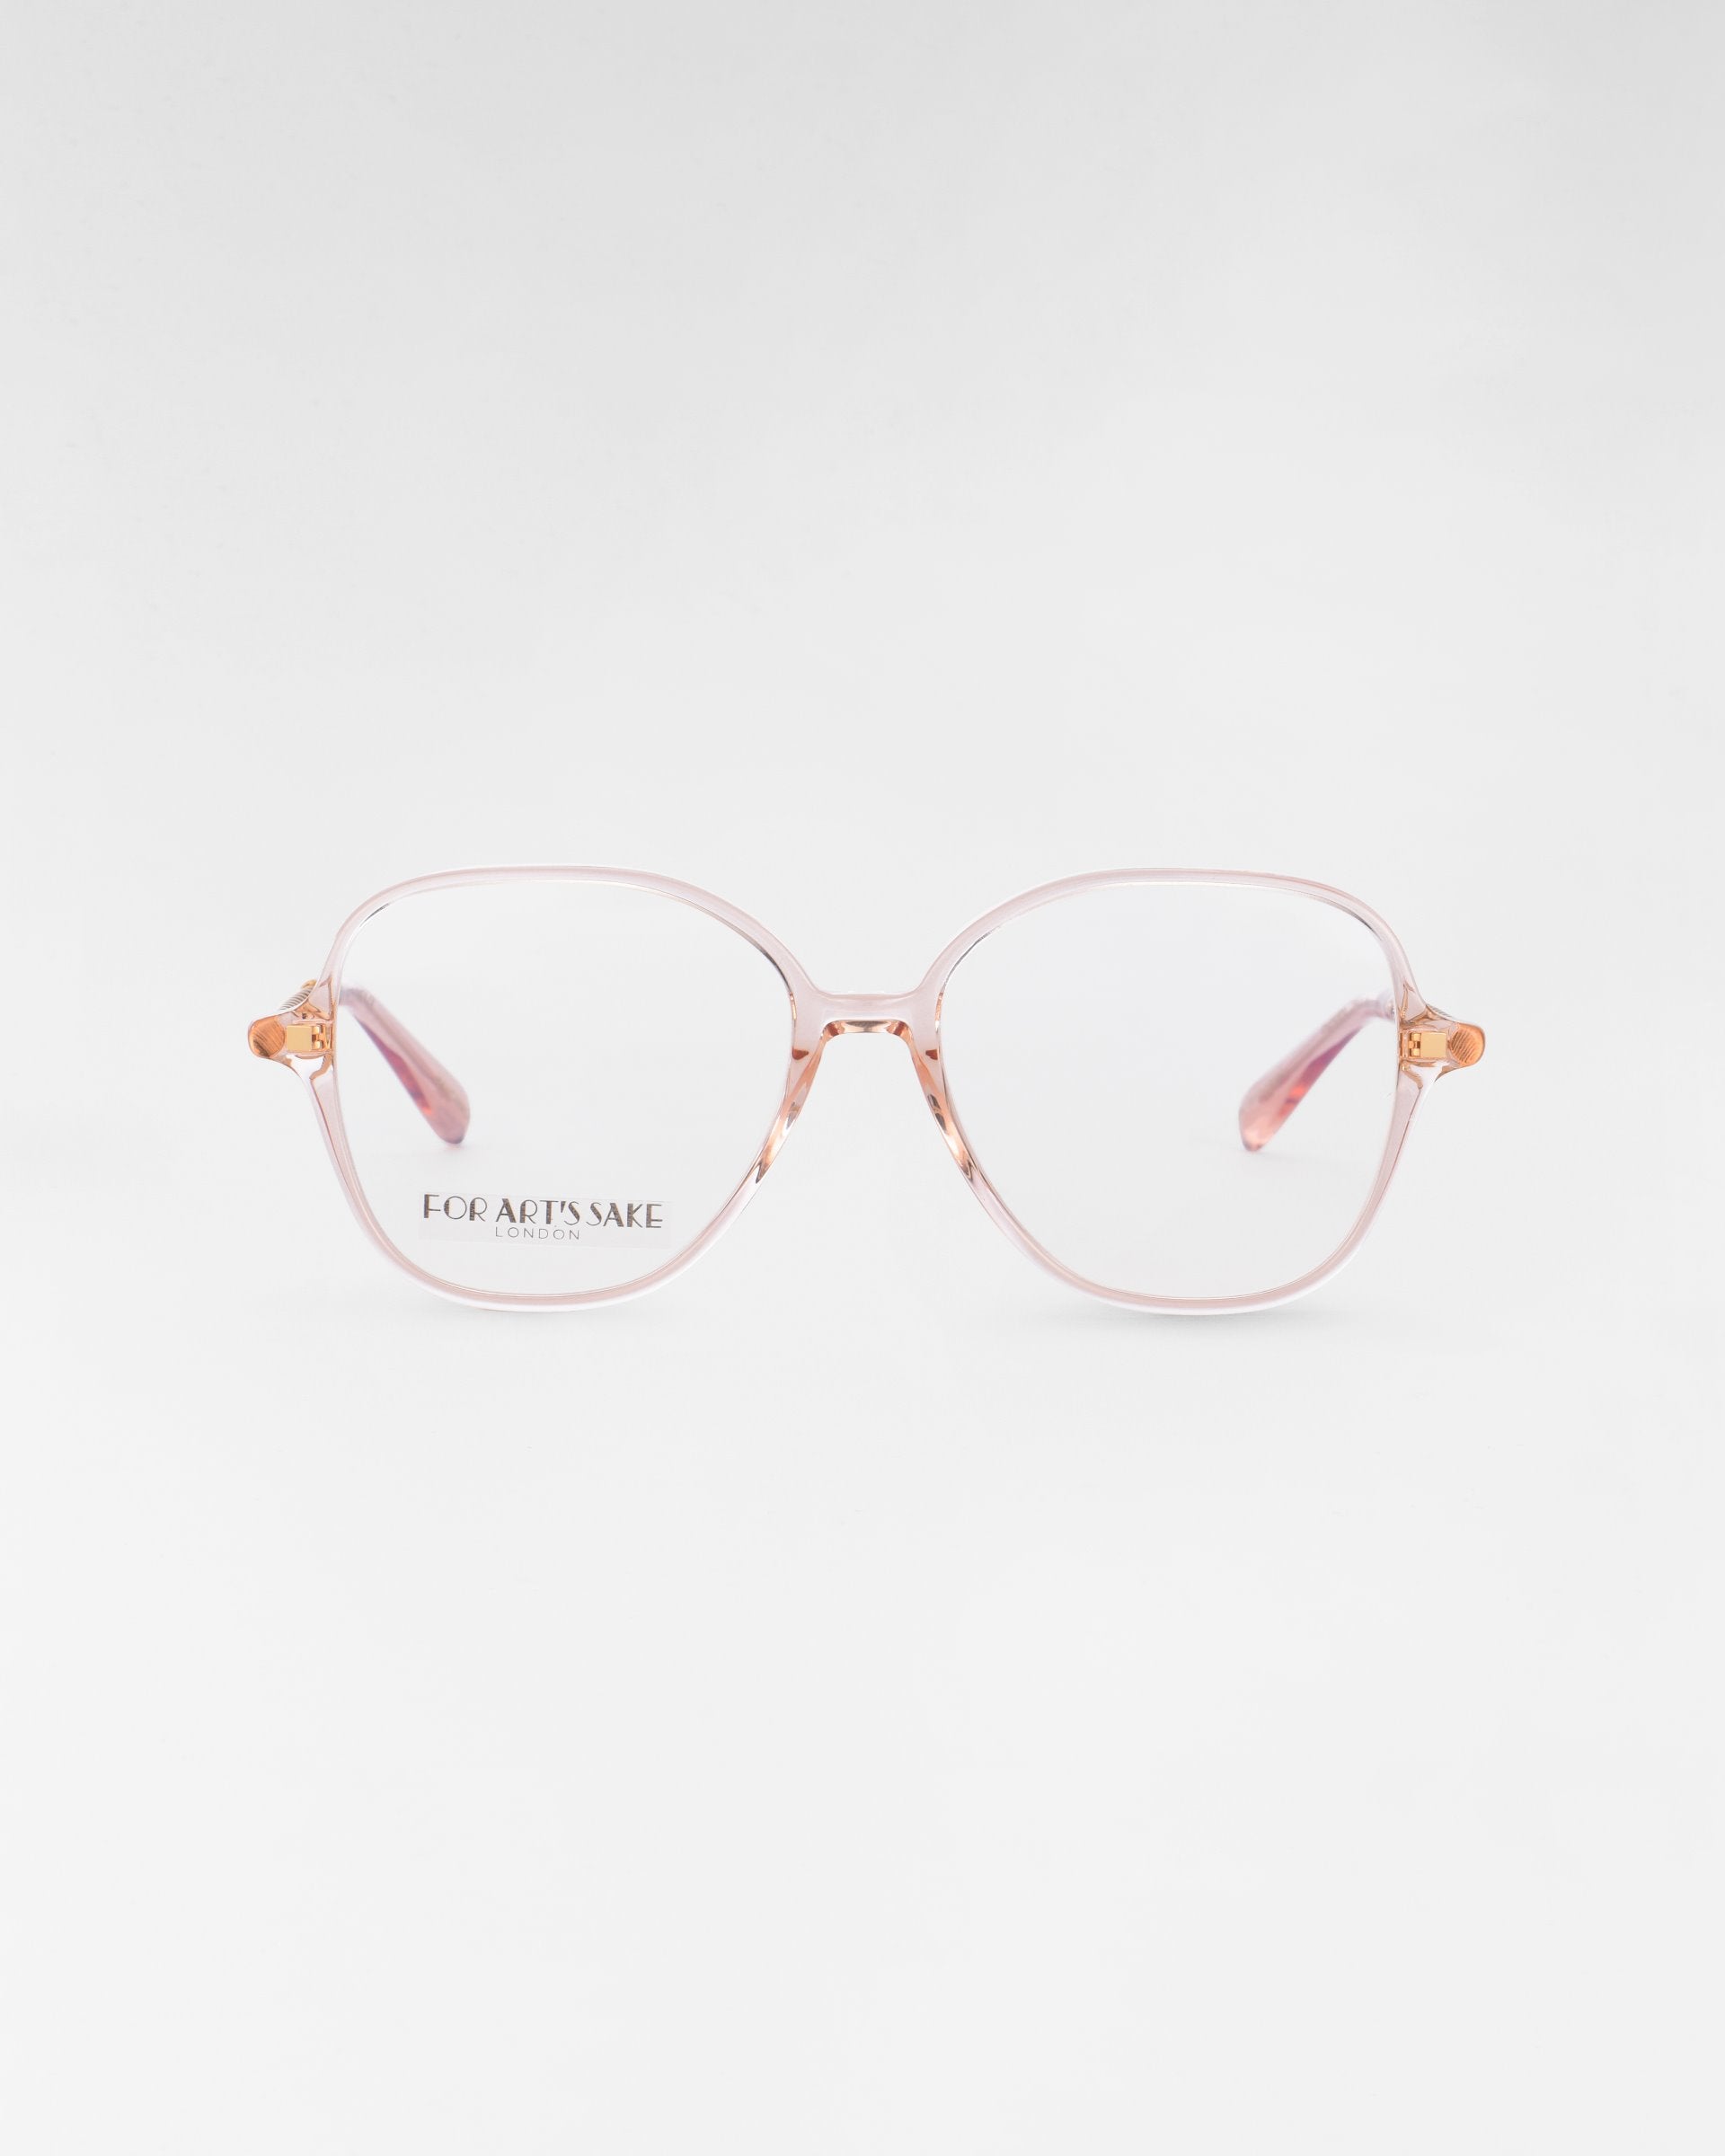 A pair of eyeglasses with large, round lenses and thin, light pink frames. The brand name "For Art's Sake®" is written in small letters on the left lens. Featuring a blue light filter, these Dumpling glasses are displayed against a plain, white background.